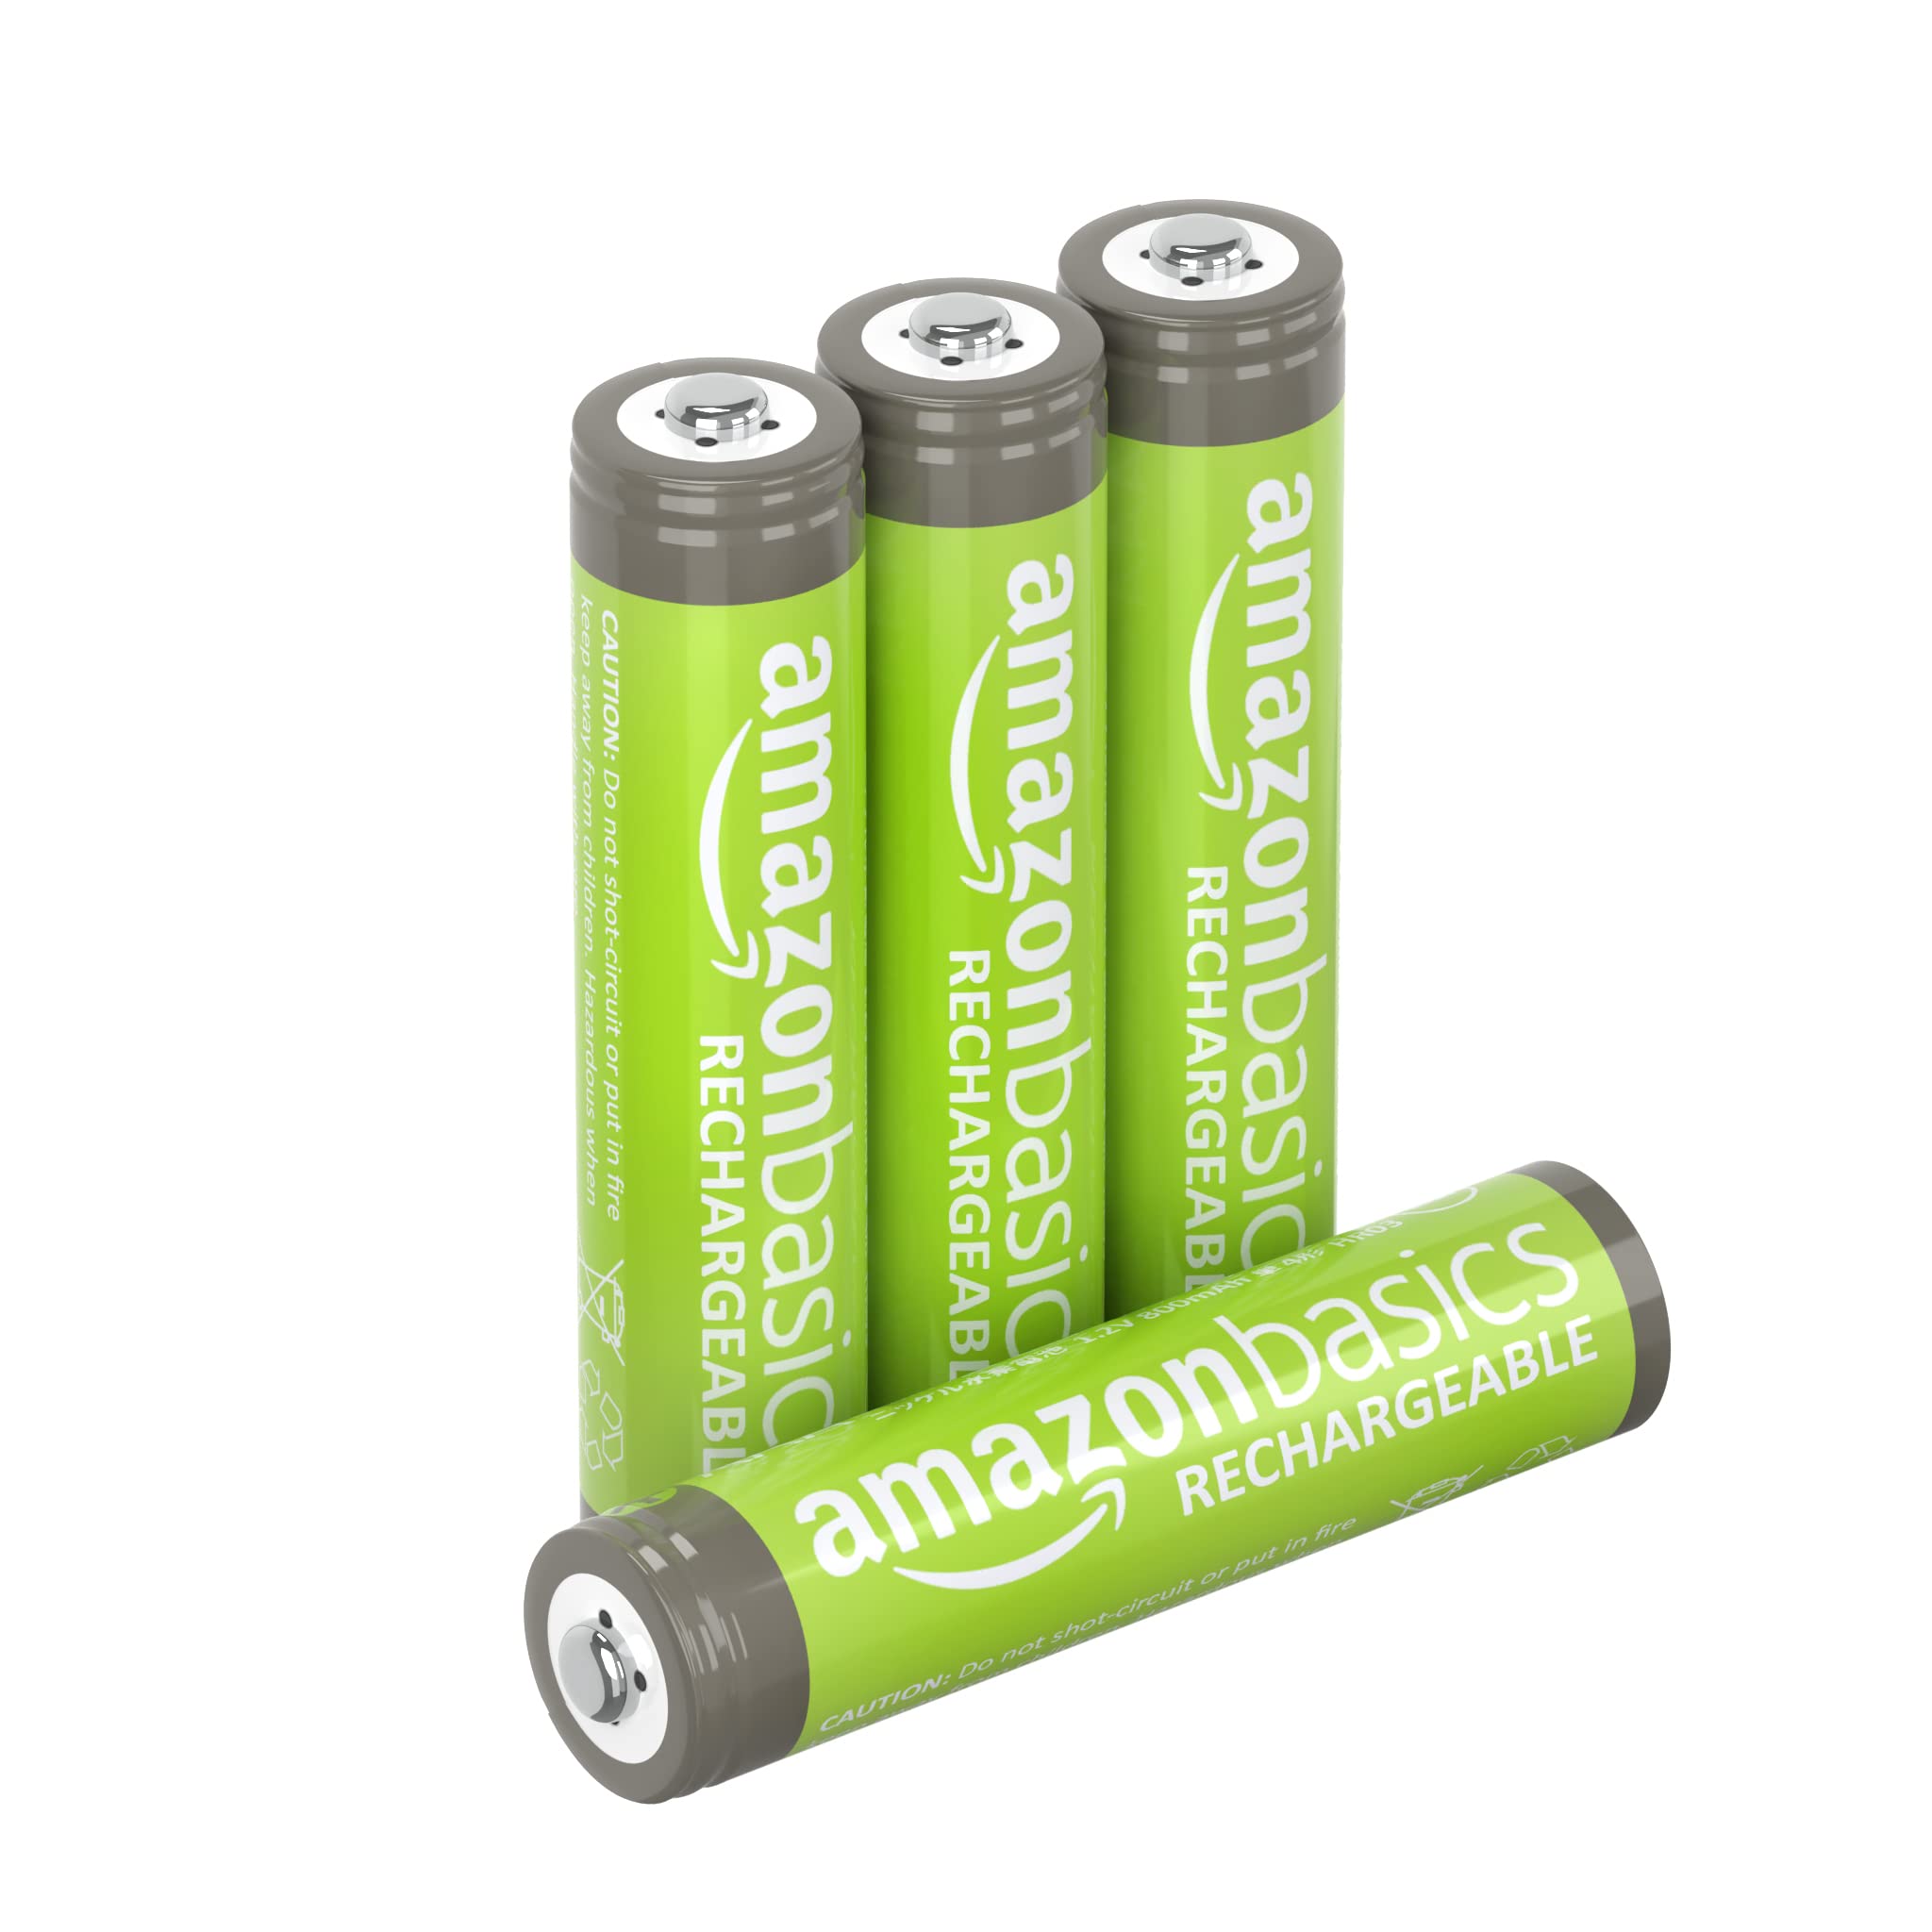 Amazon Basics 4-Pack Rechargeable AAA NiMh Performance Batteries, 800 mAh, Recharge up to 1000x Times, Pre-Charged